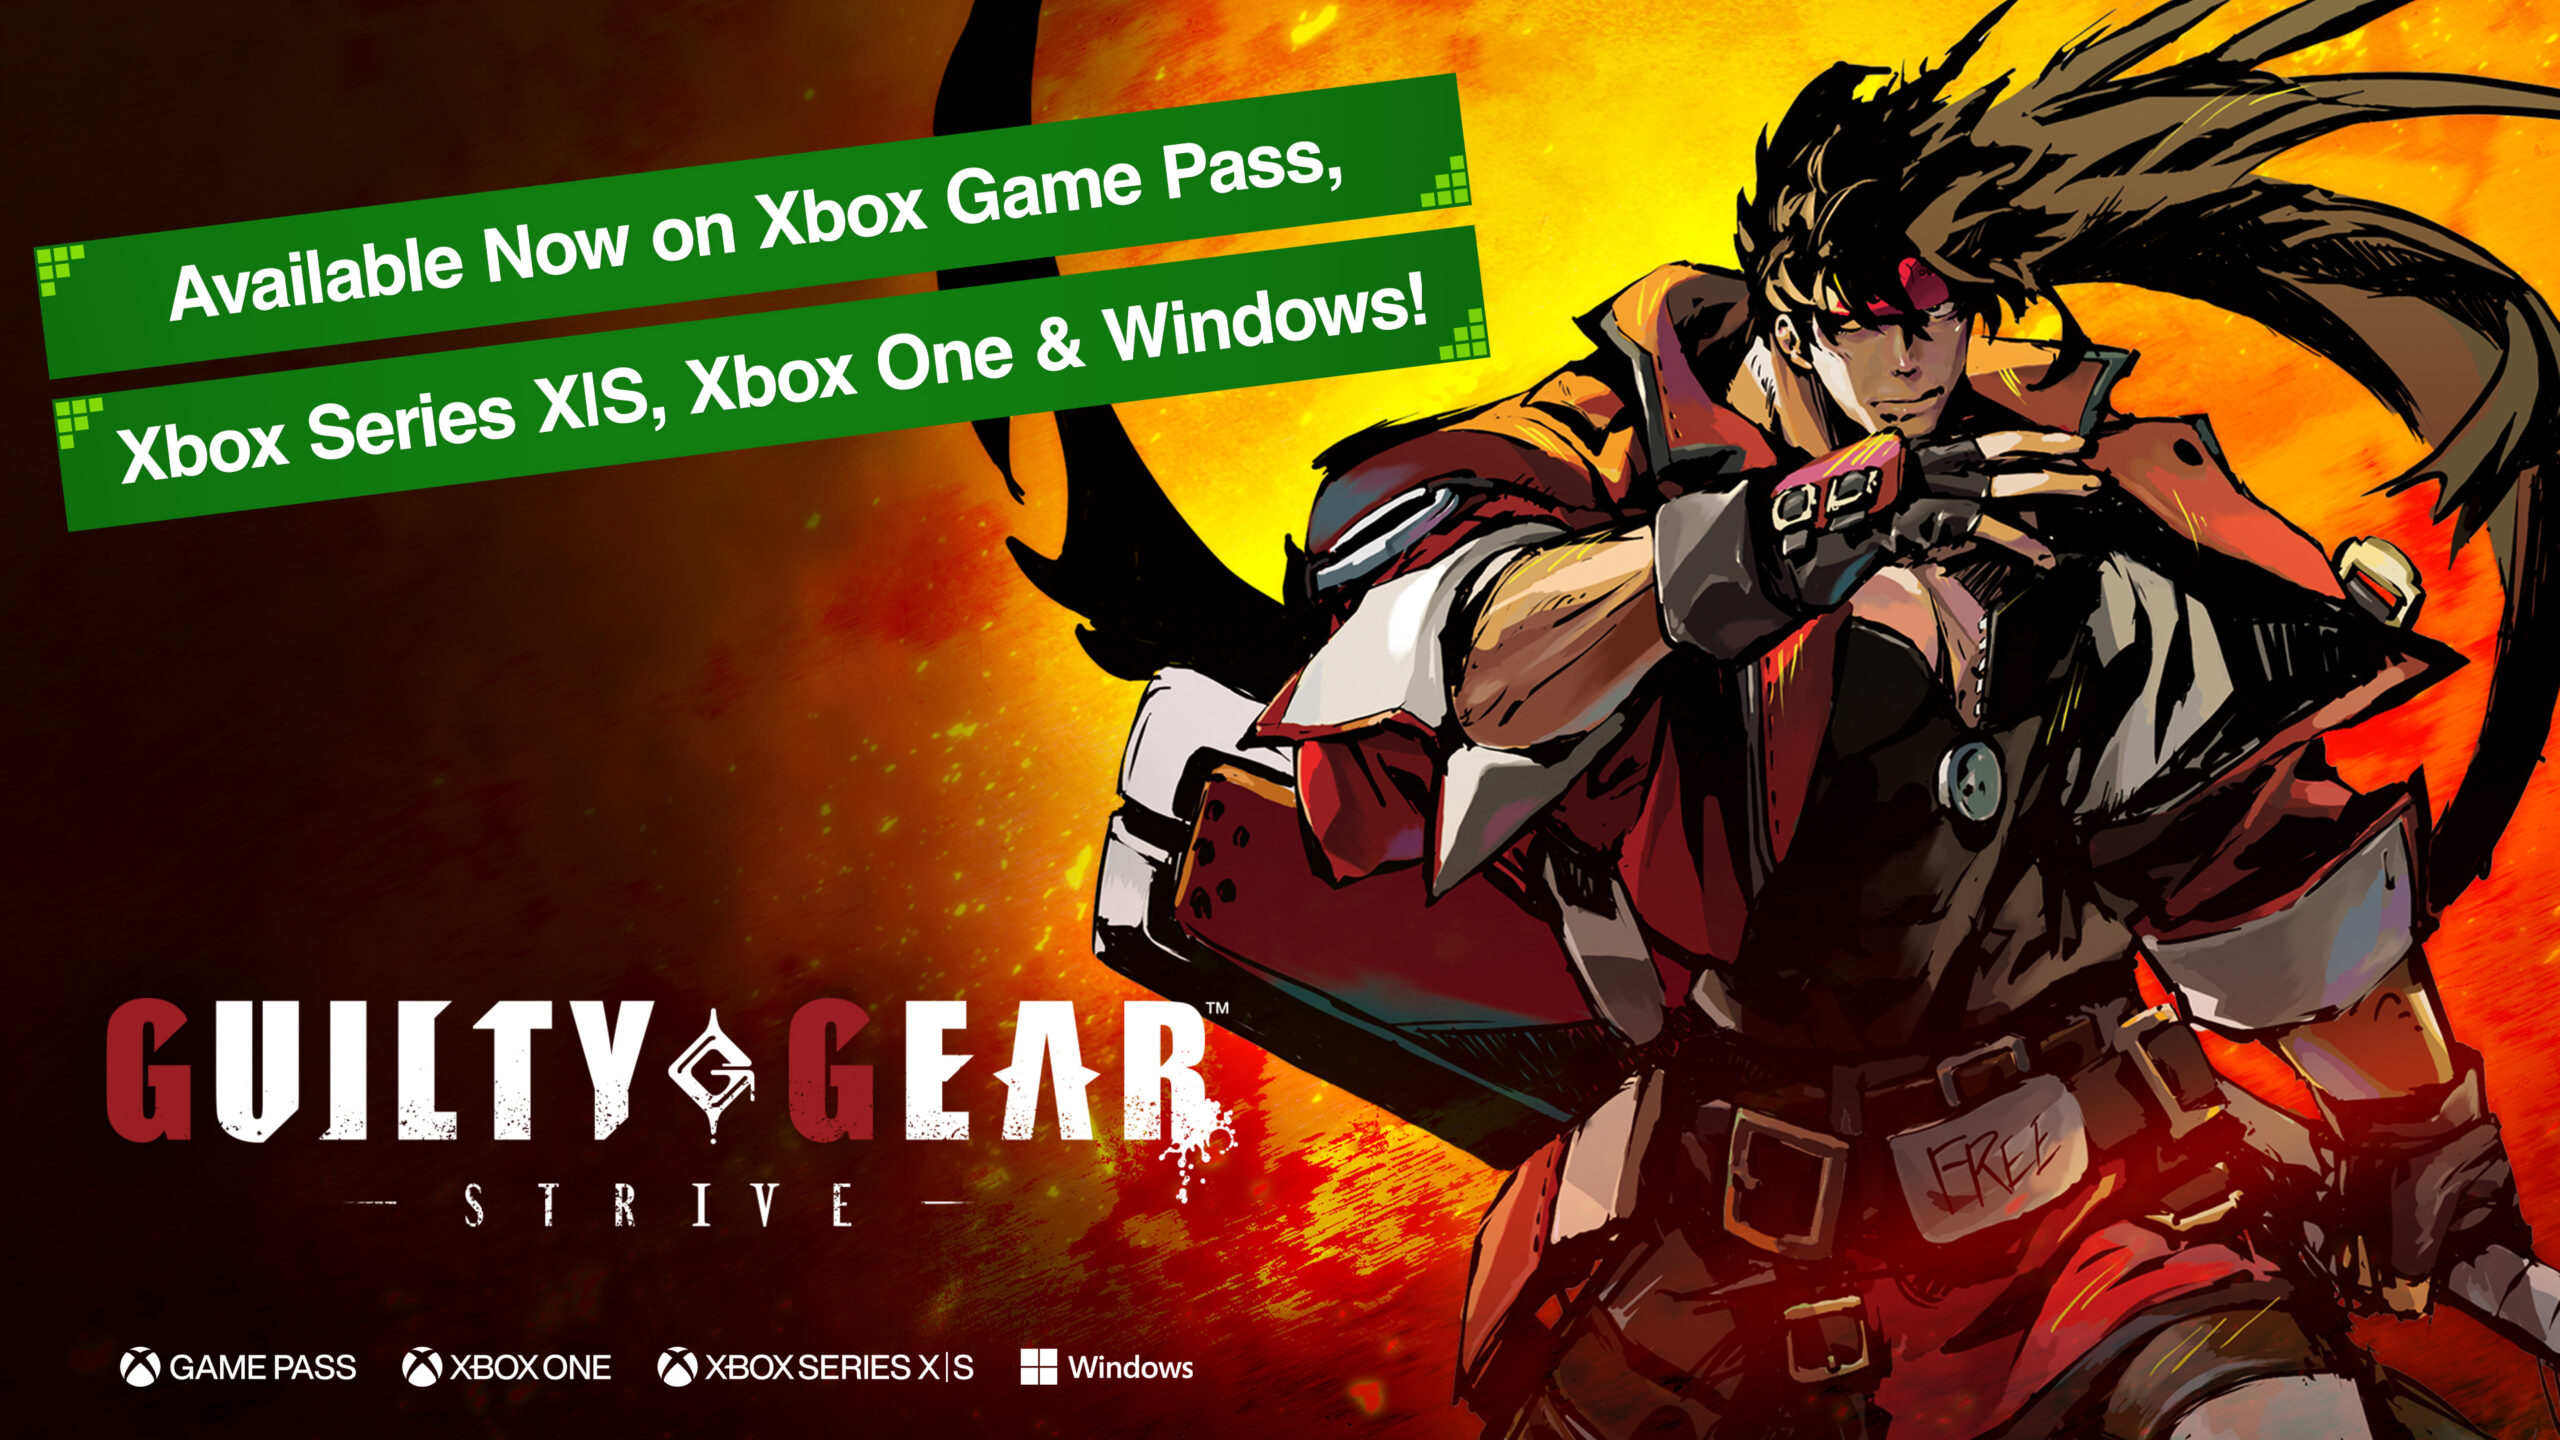 GUILTY GEAR™-STRIVE- AVAILABLE NOW FOR XBOX & WINDOWS